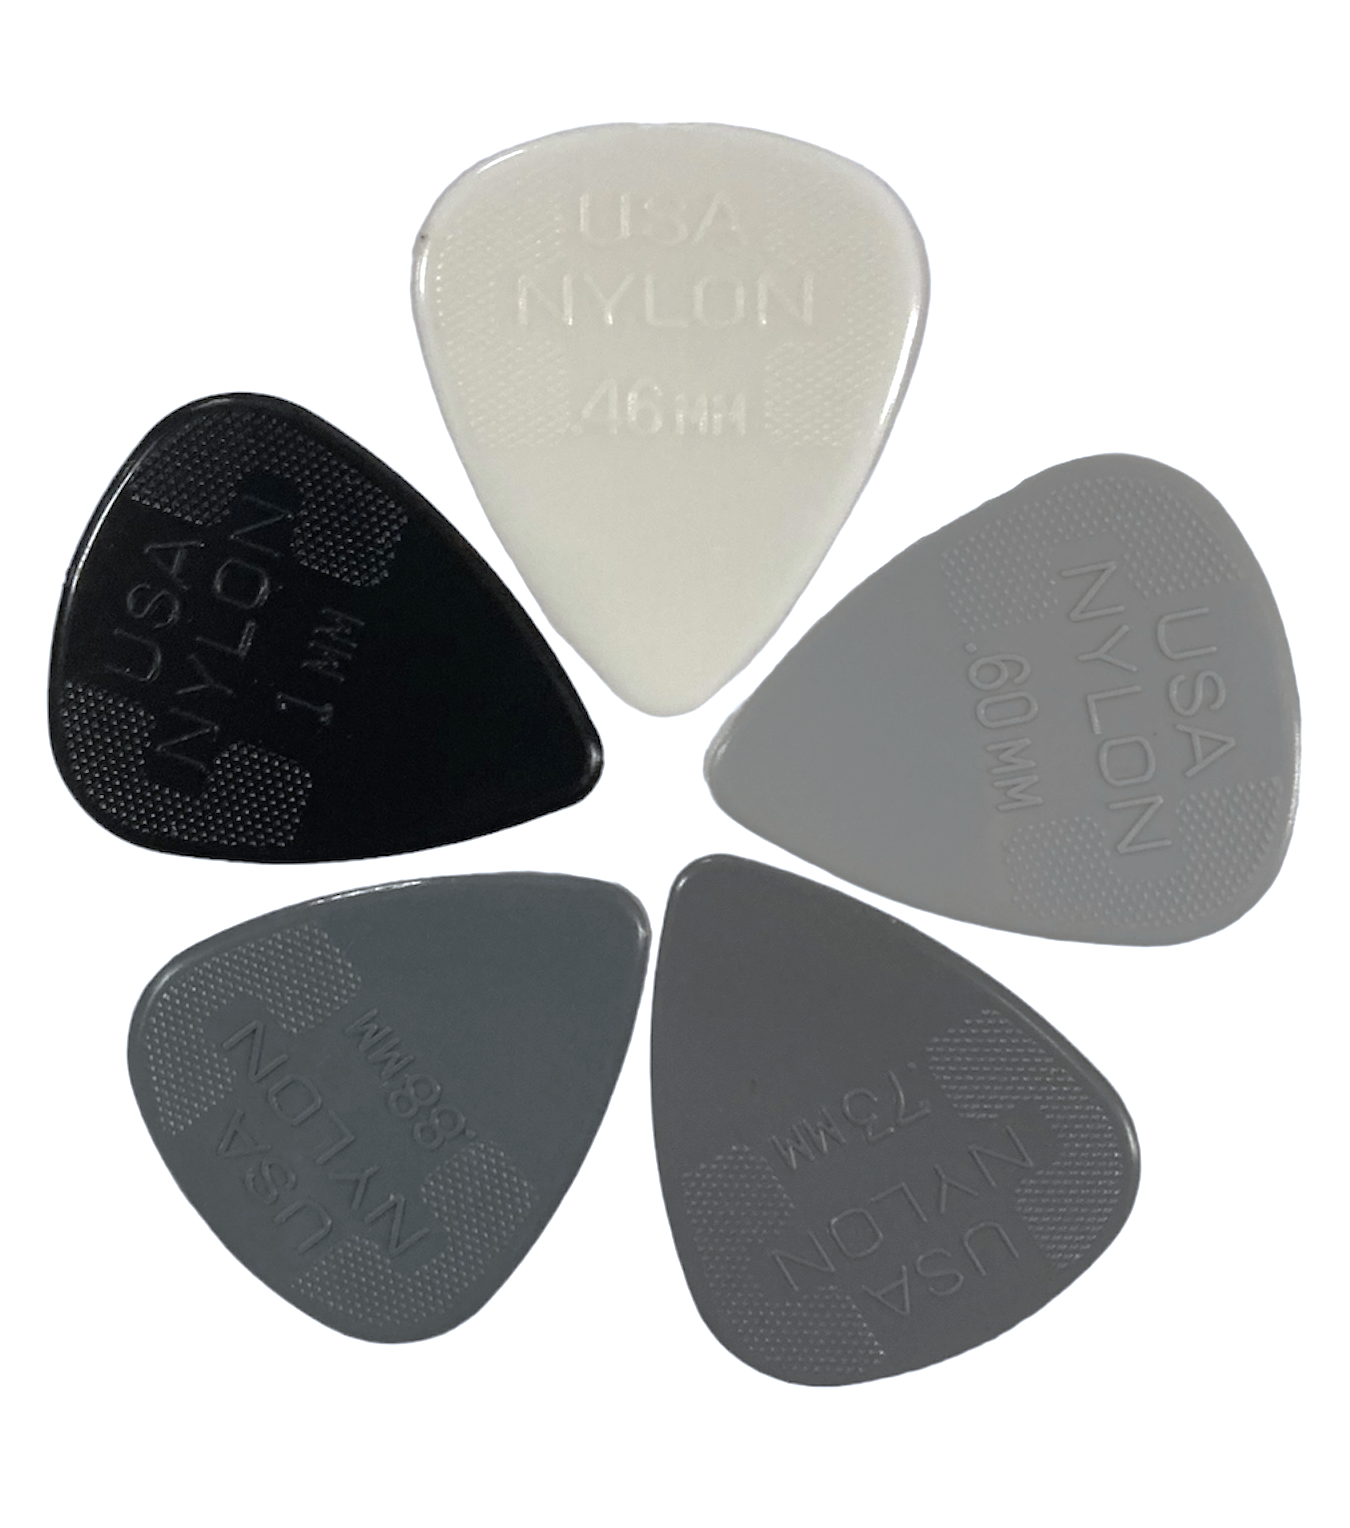 How to Choose a Guitar Pick